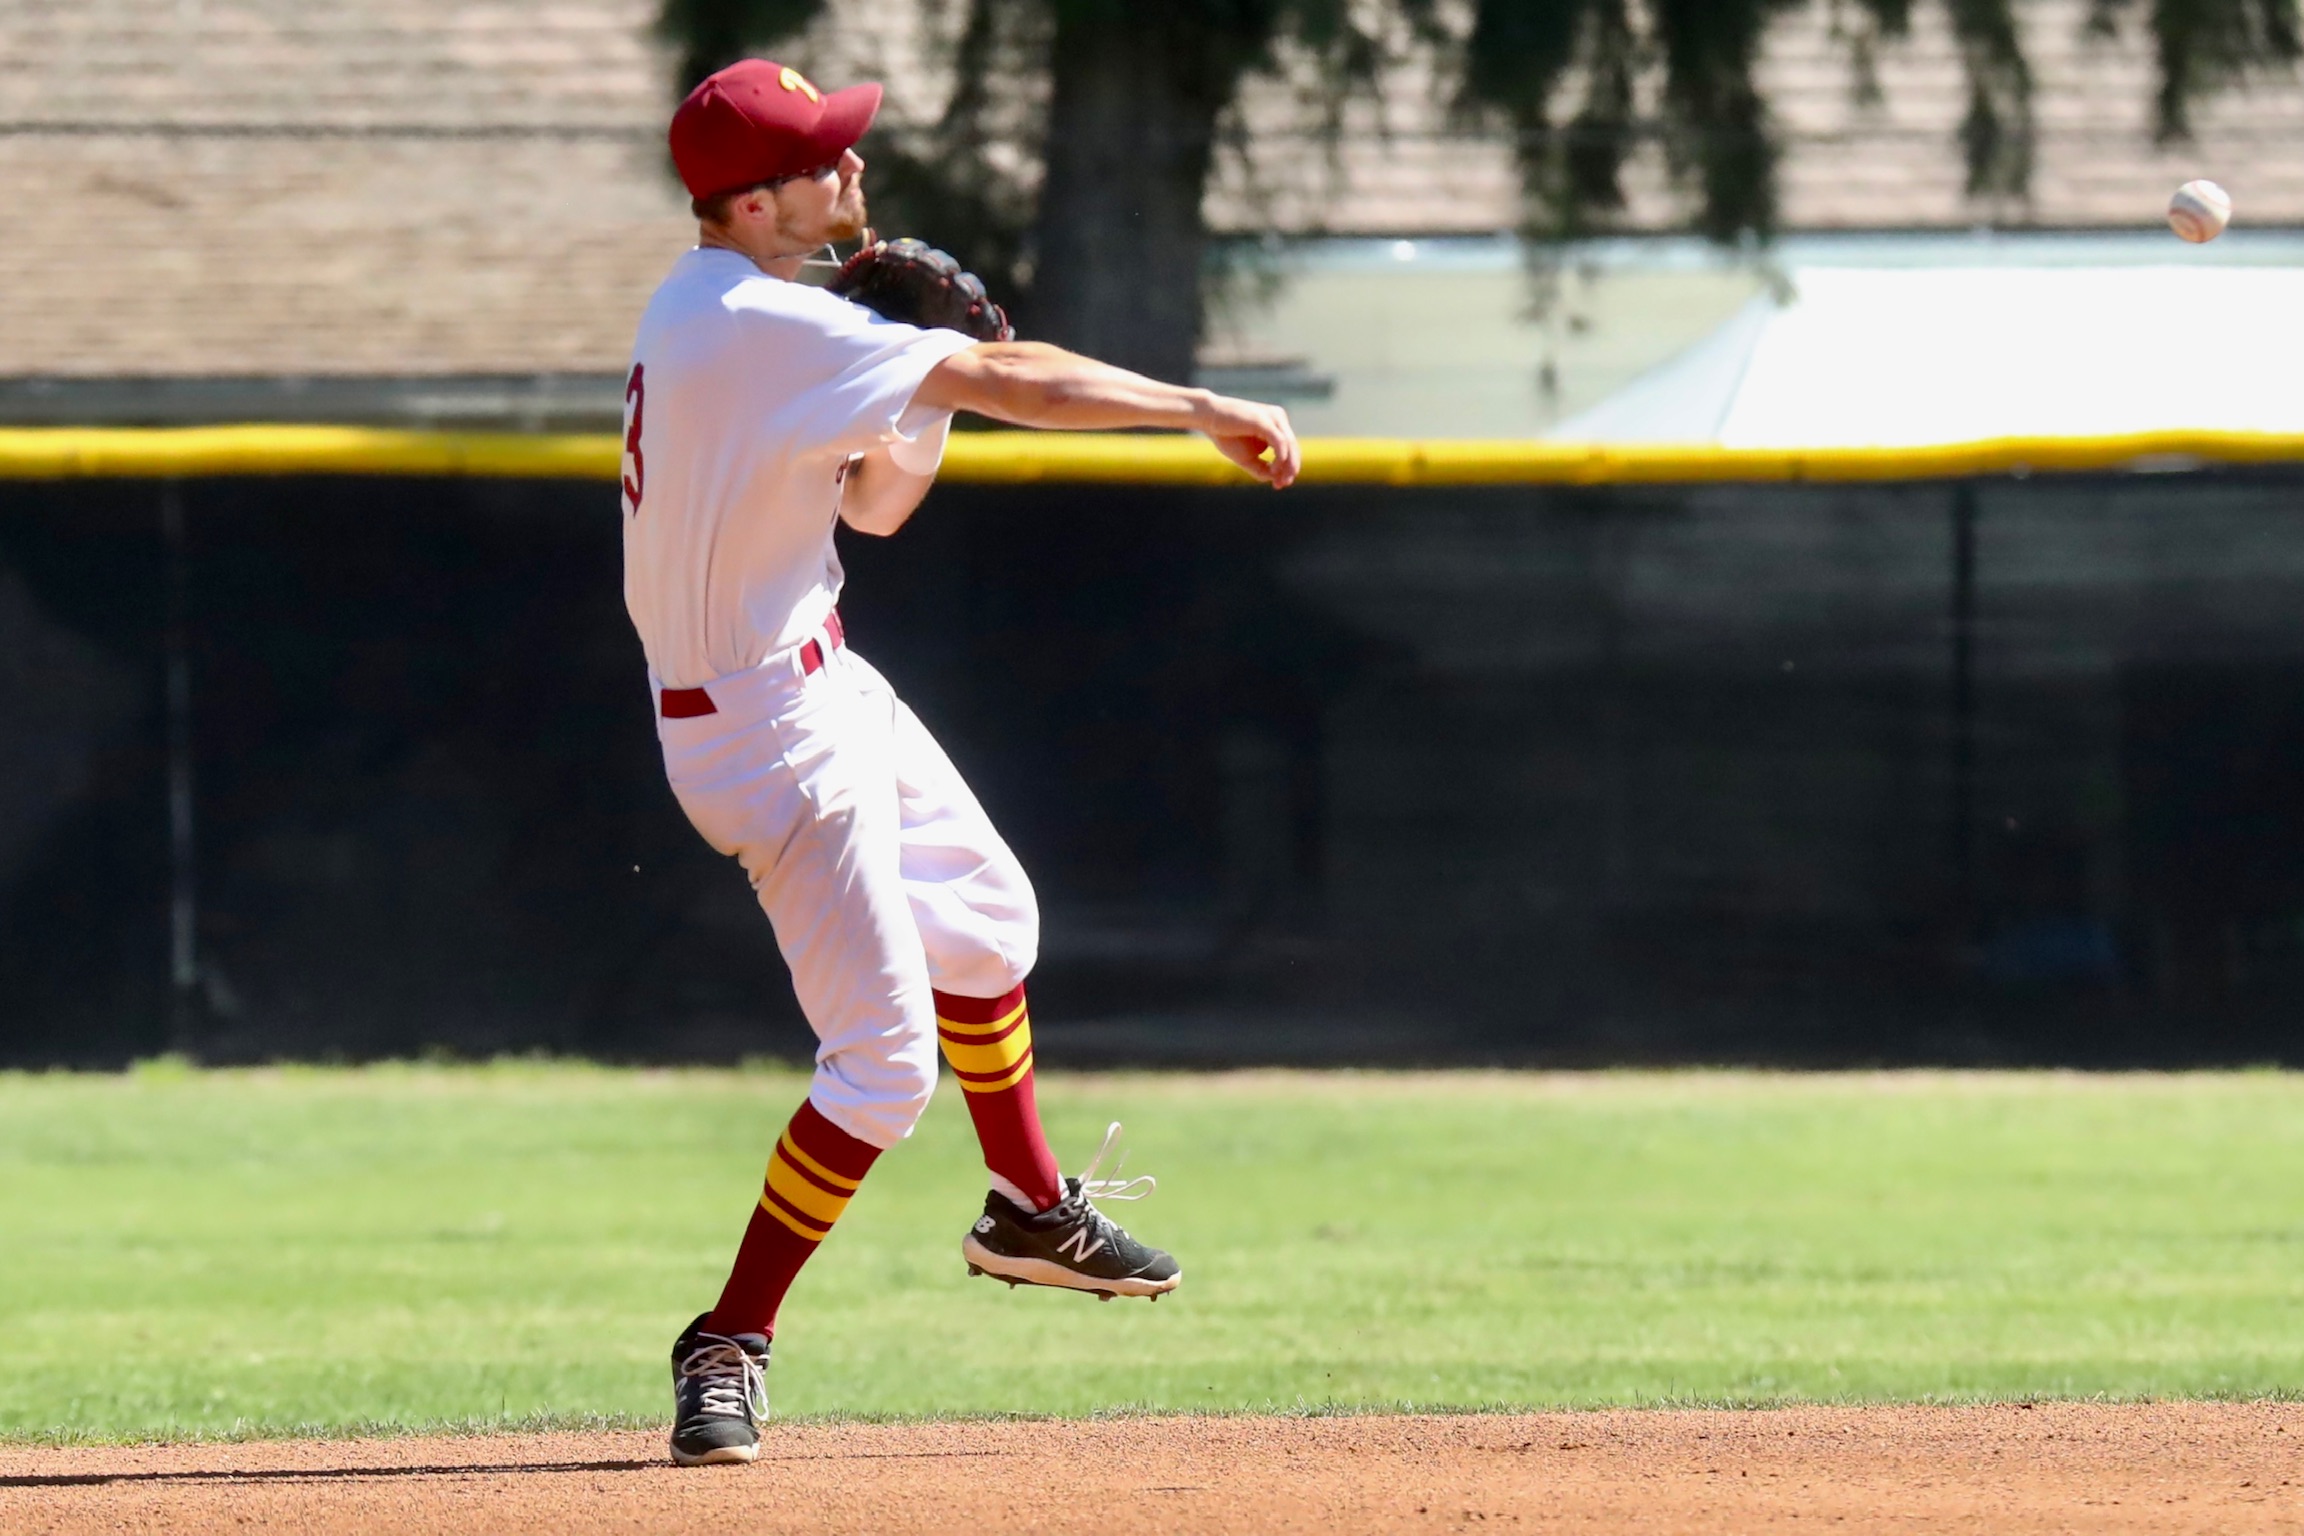 Andrew Scannell is a returning Lancers starting second baseman from the 2019 PCC team (photo by Michael Watkins, PCC Athletics).